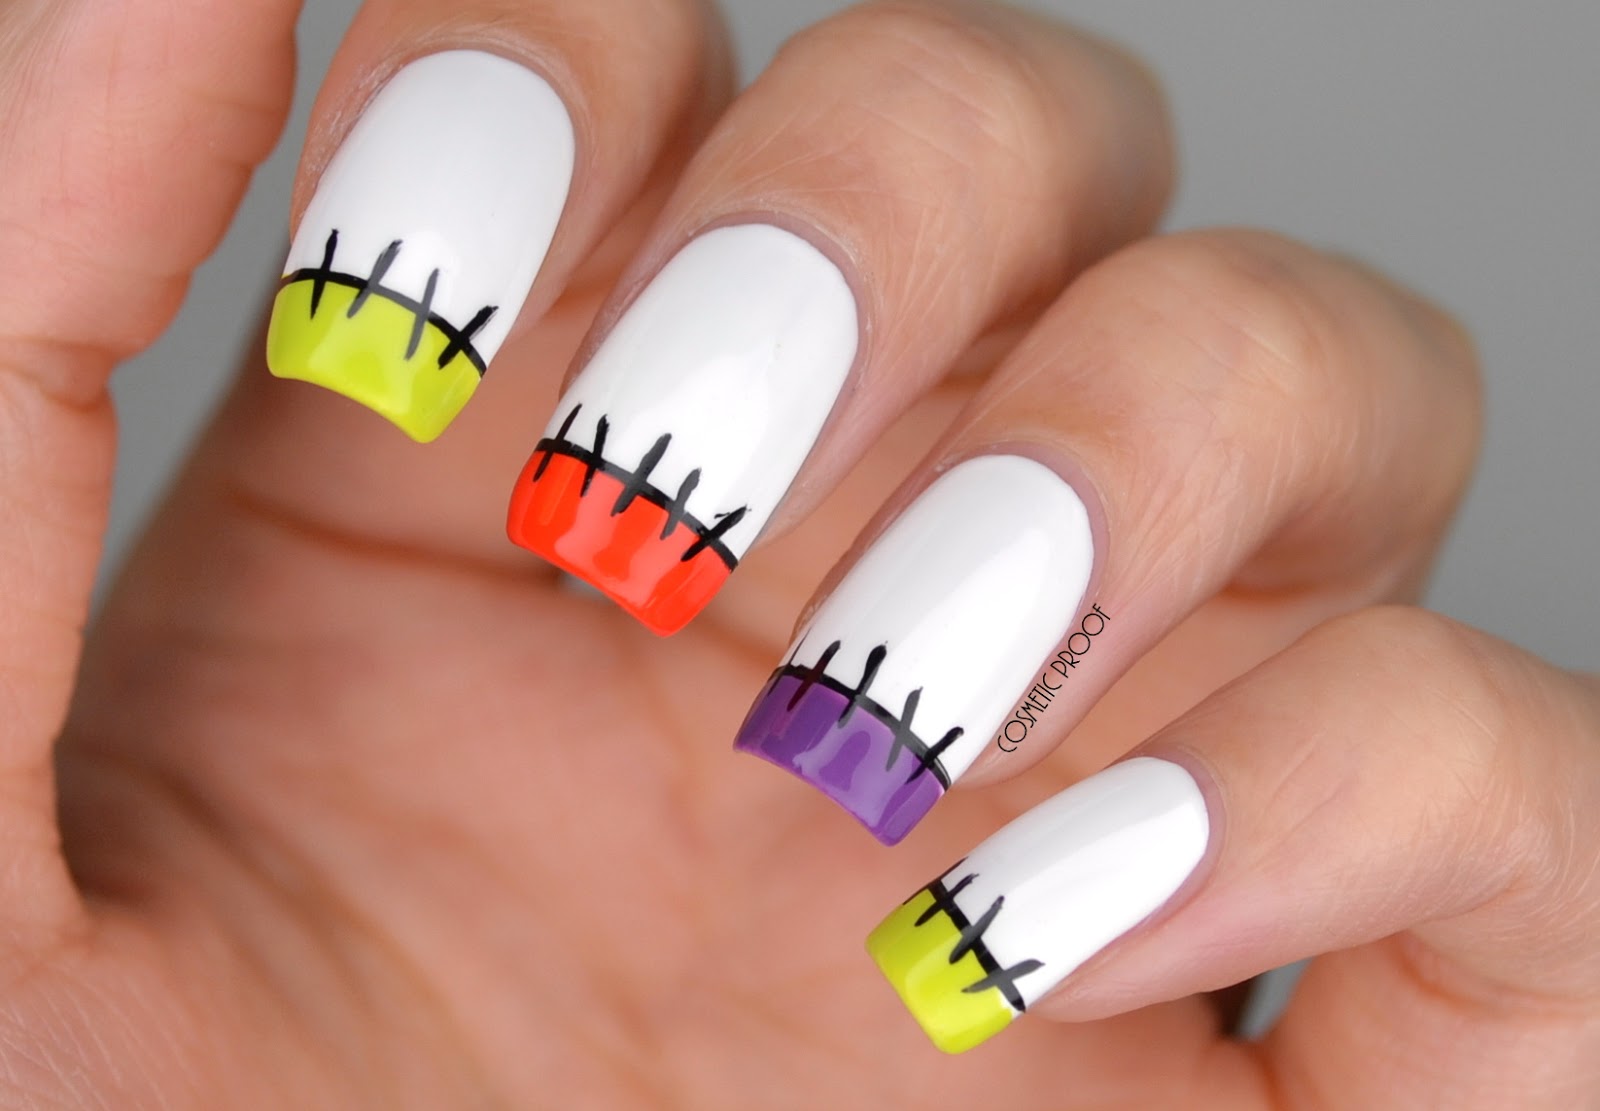 NAILS | Halloween Stitches French Manicure | Cosmetic ...